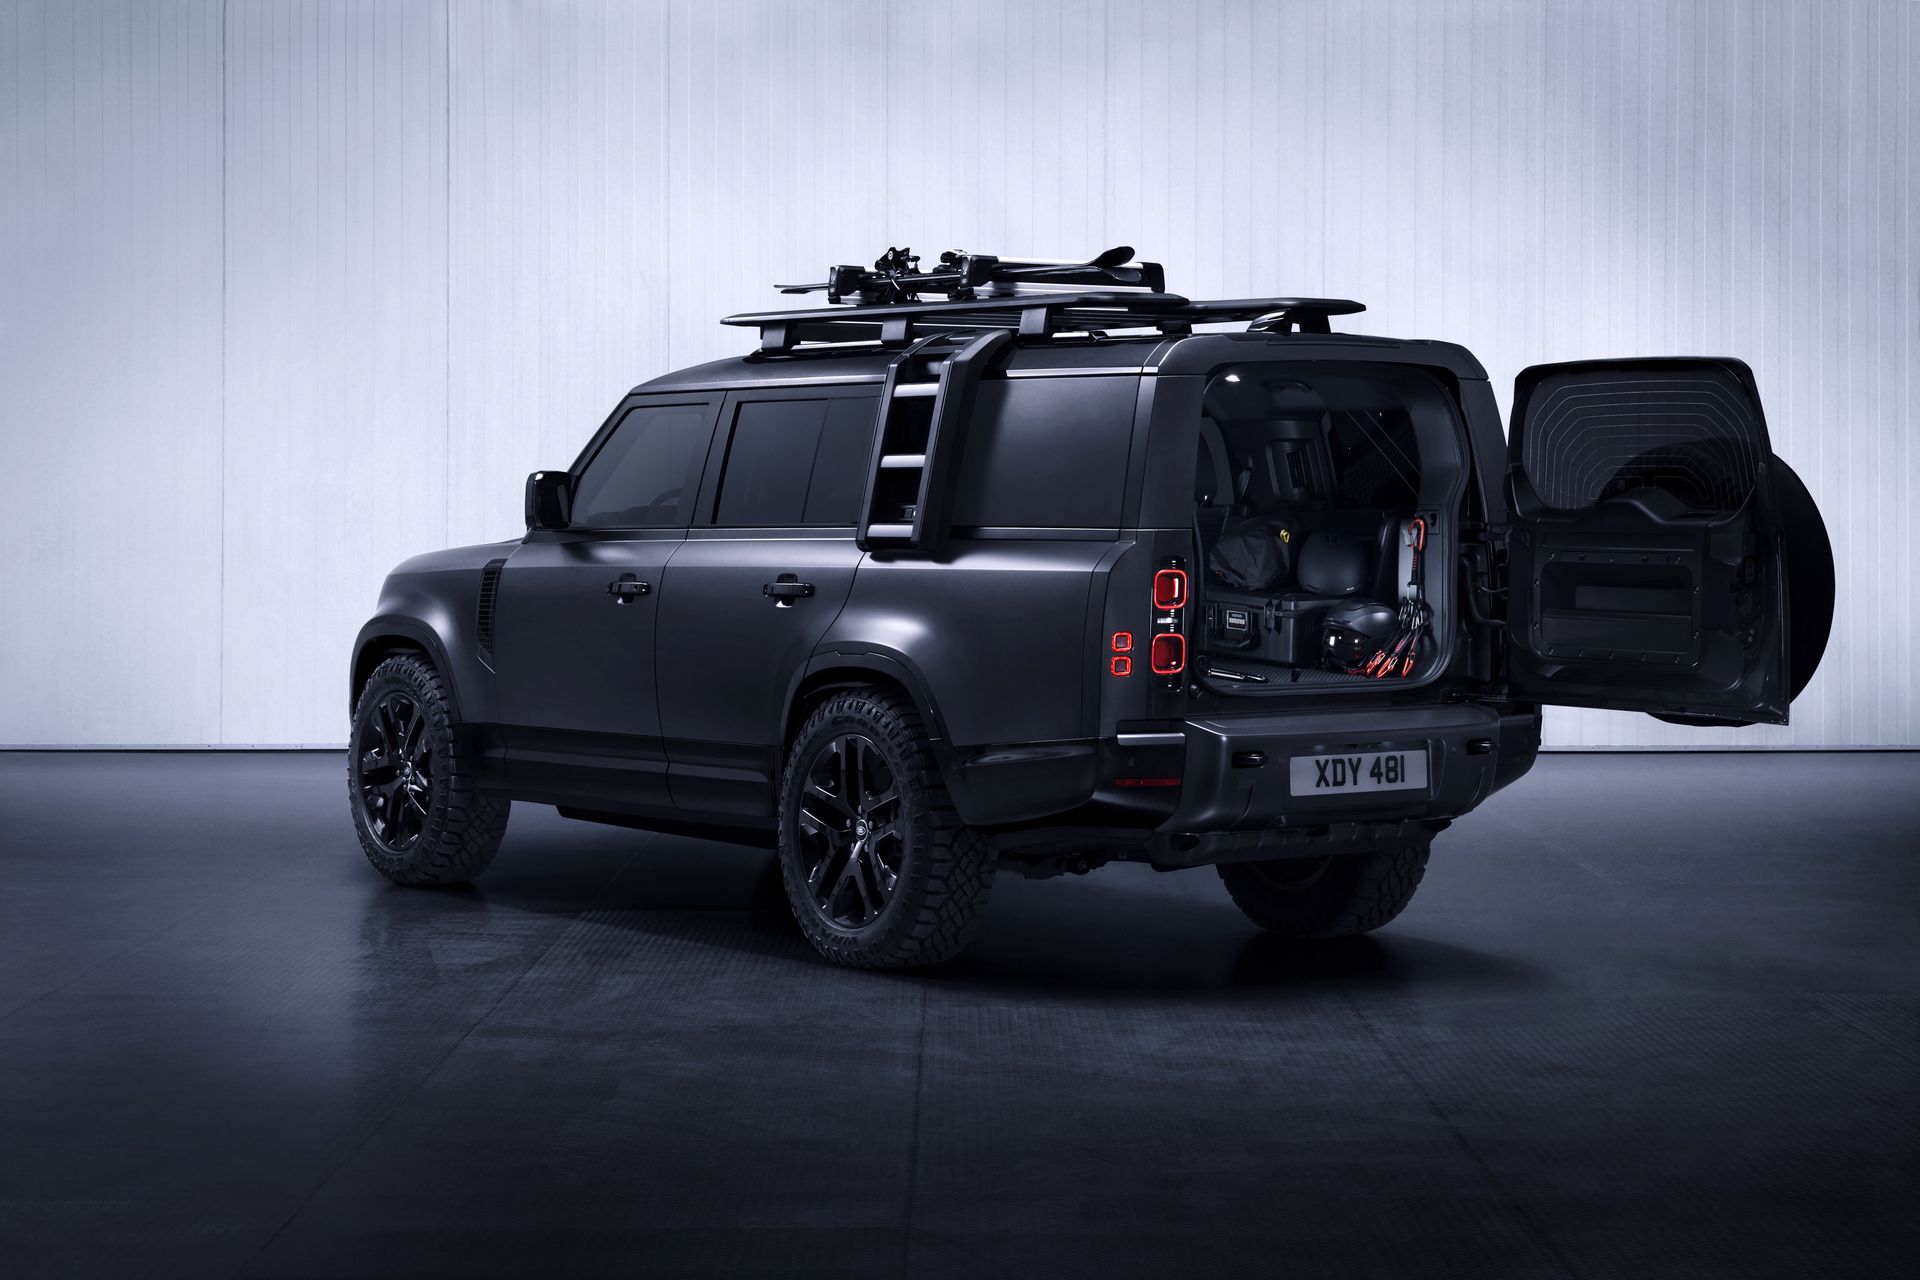 Land Rover Defender 130 8-seater SUV unveiled, photos